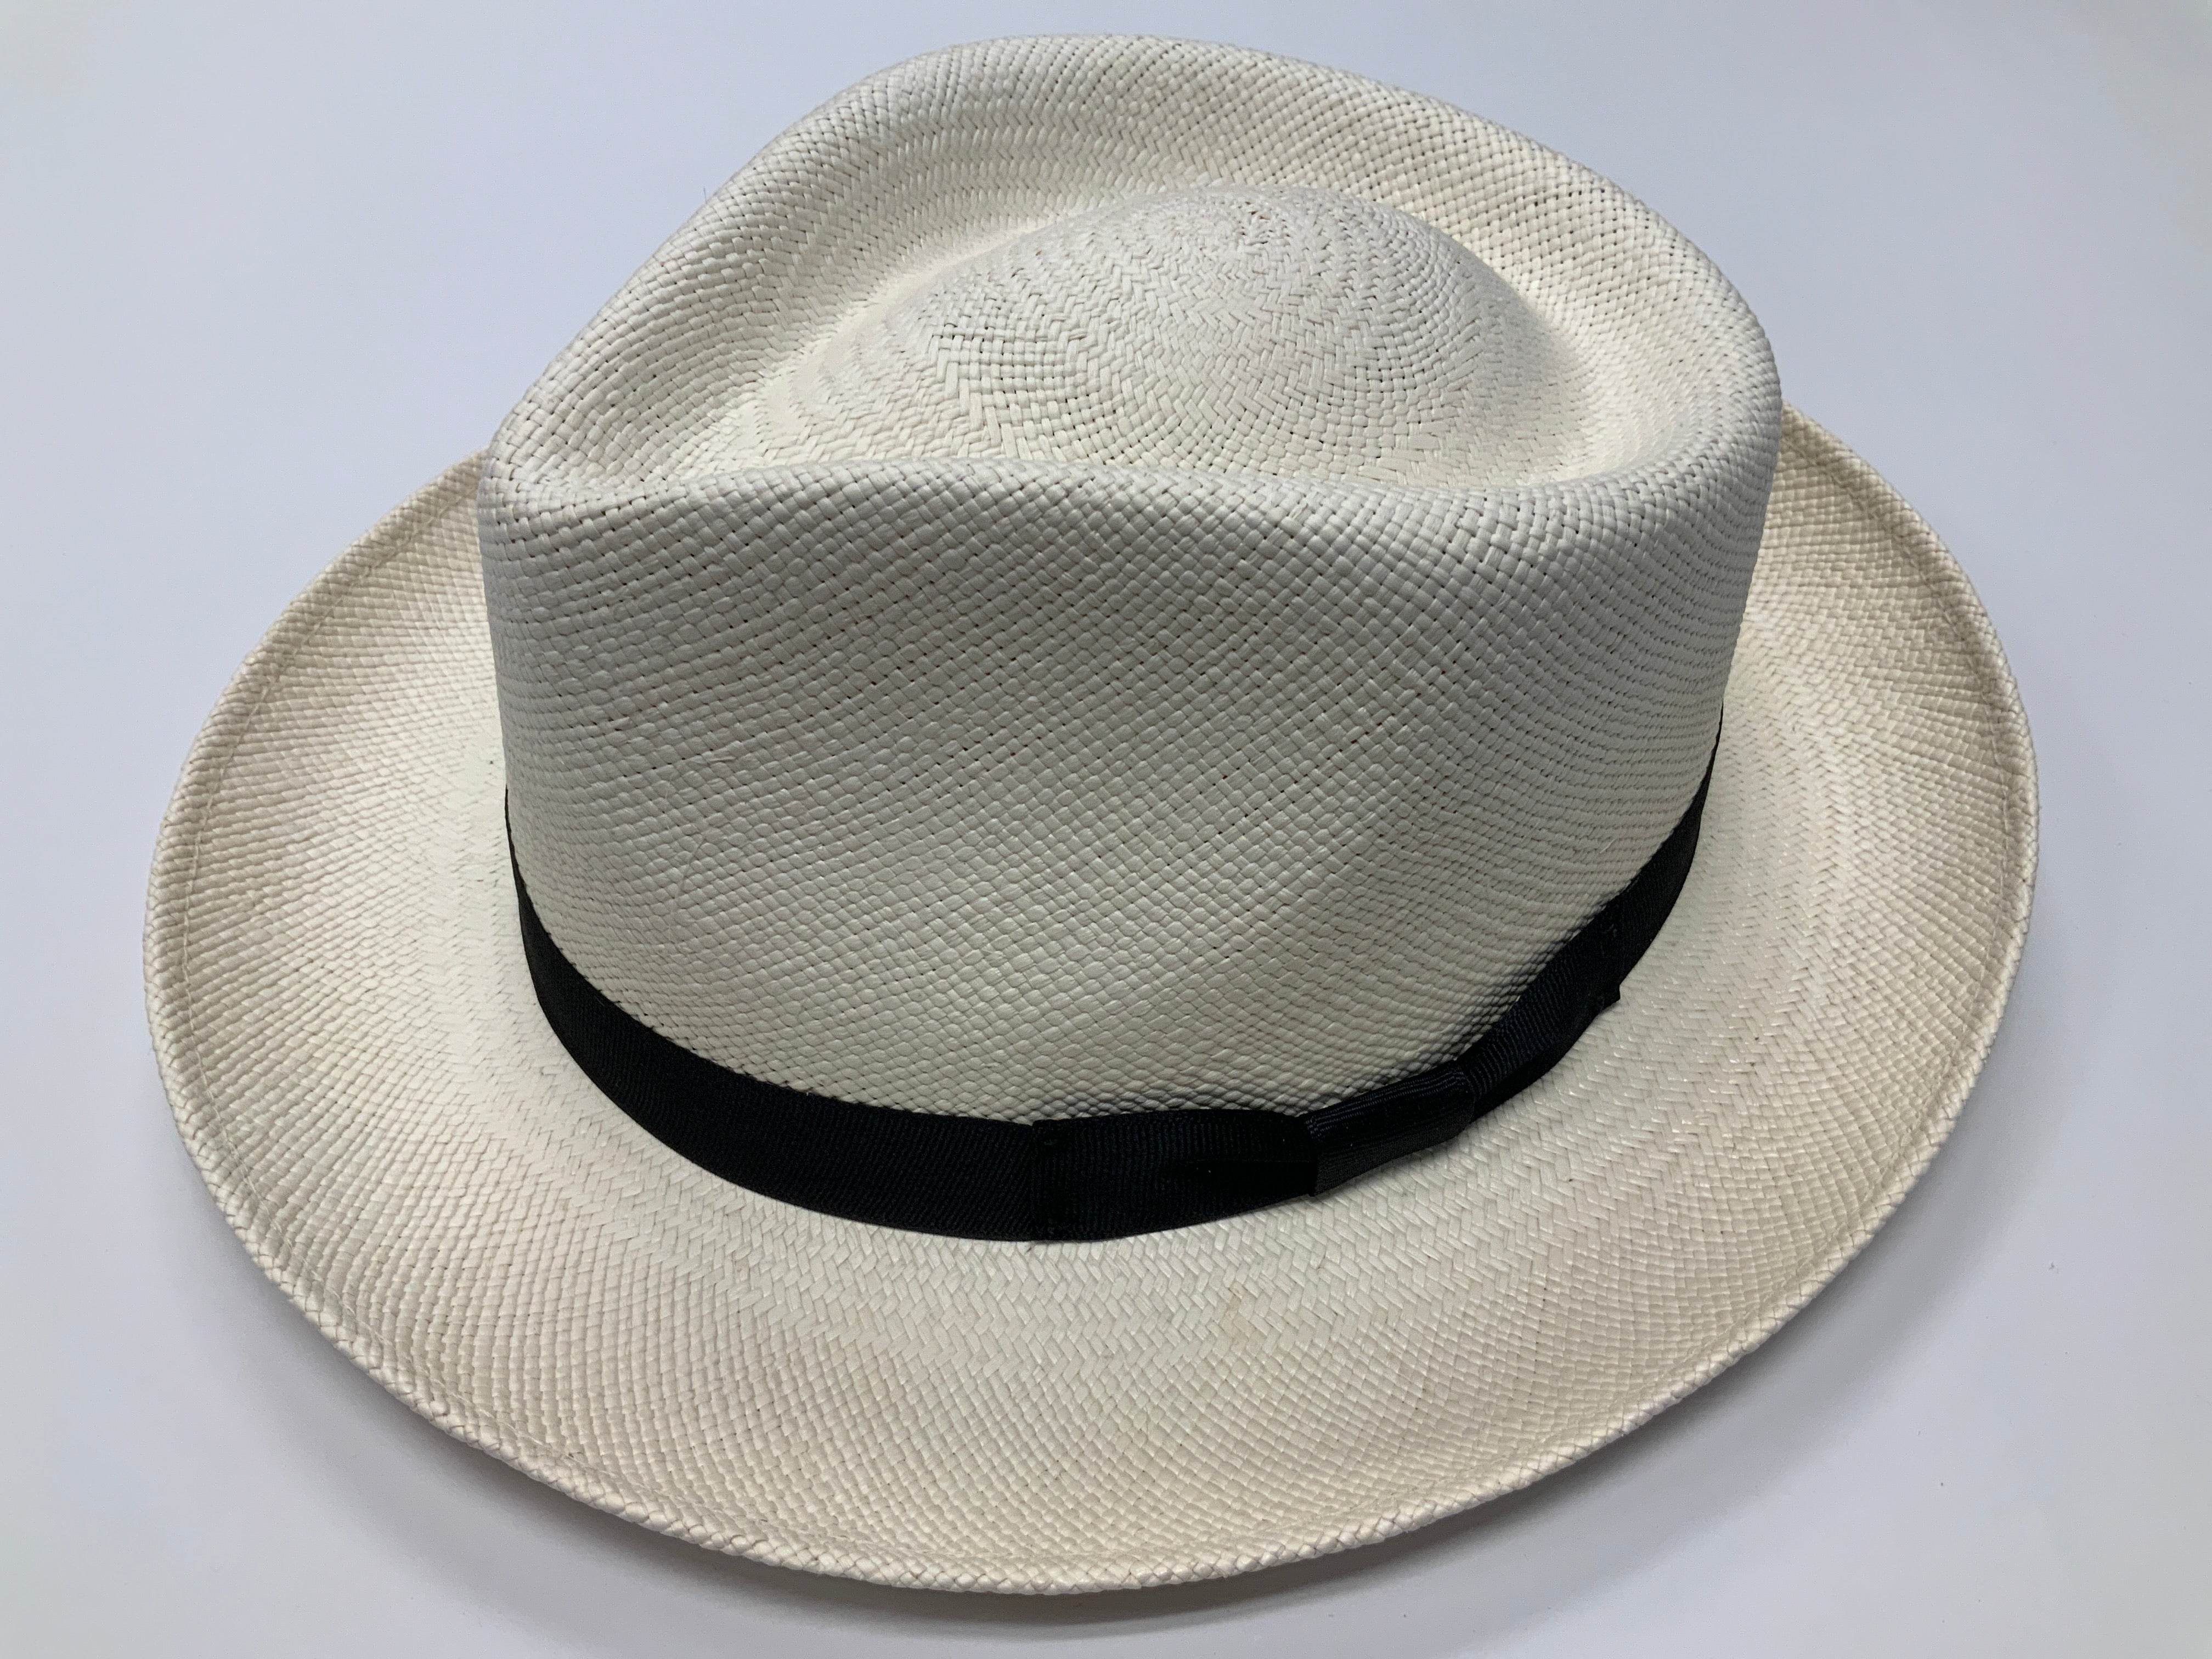 Stetson Retro Hat has a cotton Sweatband, soft finish, and Genuine Panama straw hat.  Brim: 2 1/2  Crown: 4 1/2  Made in Mexico at lil johns big and tall